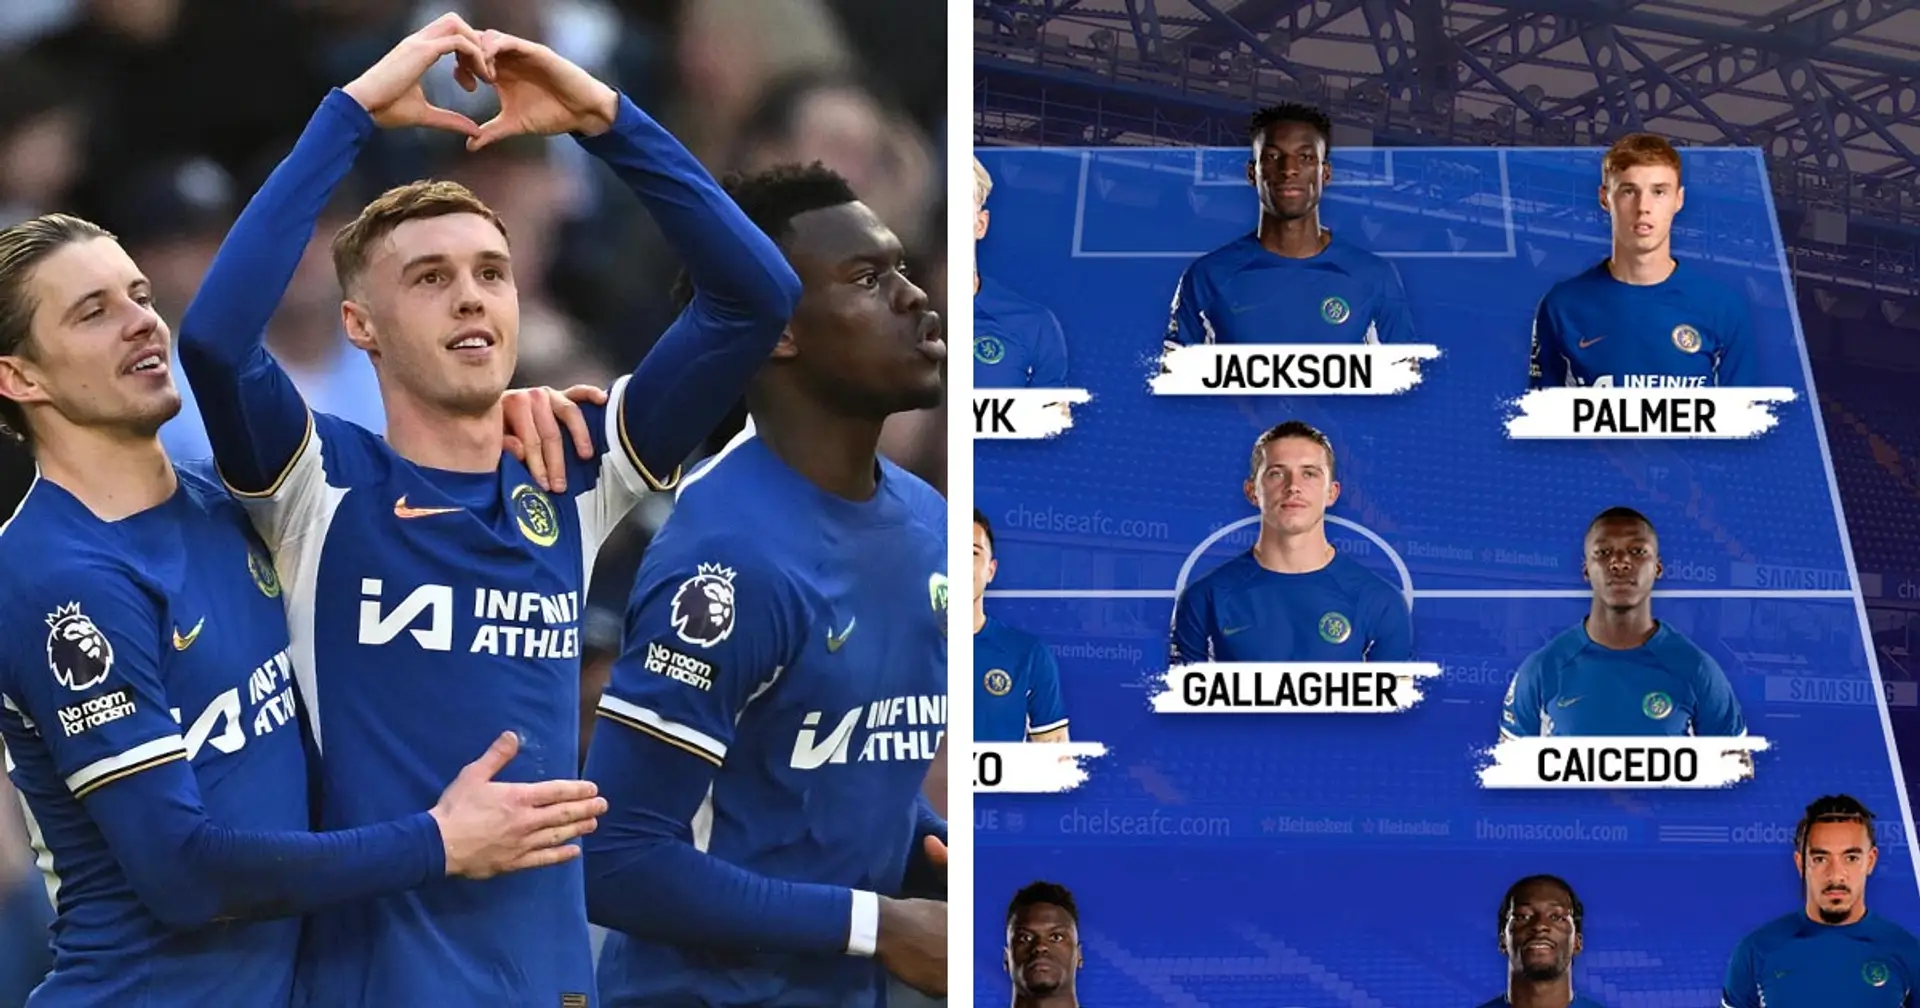 Chelsea's biggest strengths from Burnley draw shown in lineup - 3 players feature